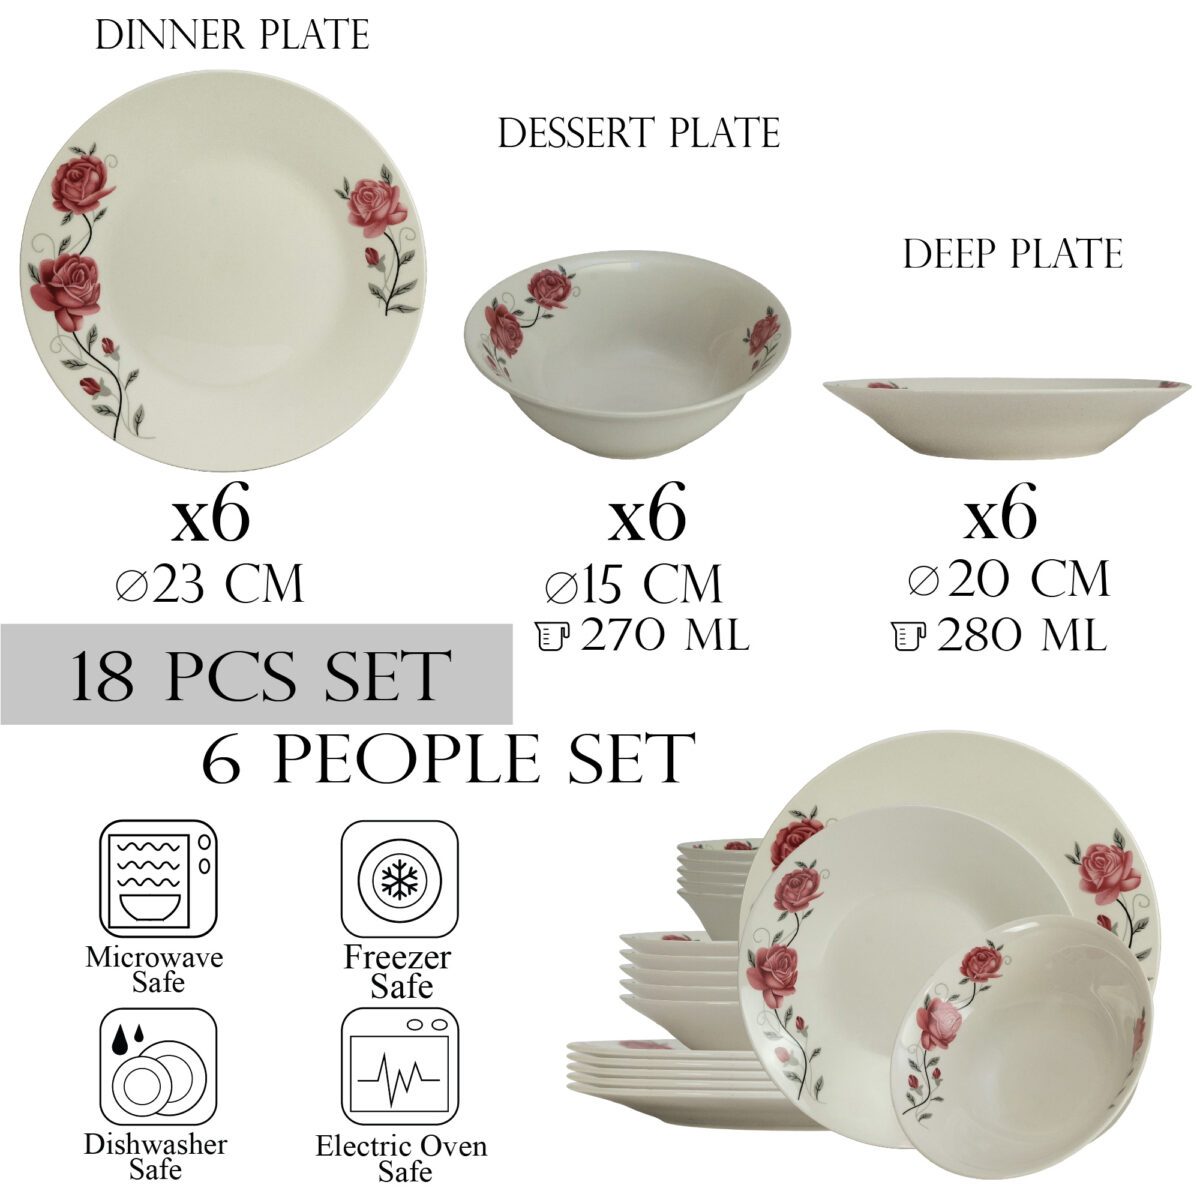 Dinnerware Set, 18 pieces, for 6 people, Cesiro, Ivory with pink rose